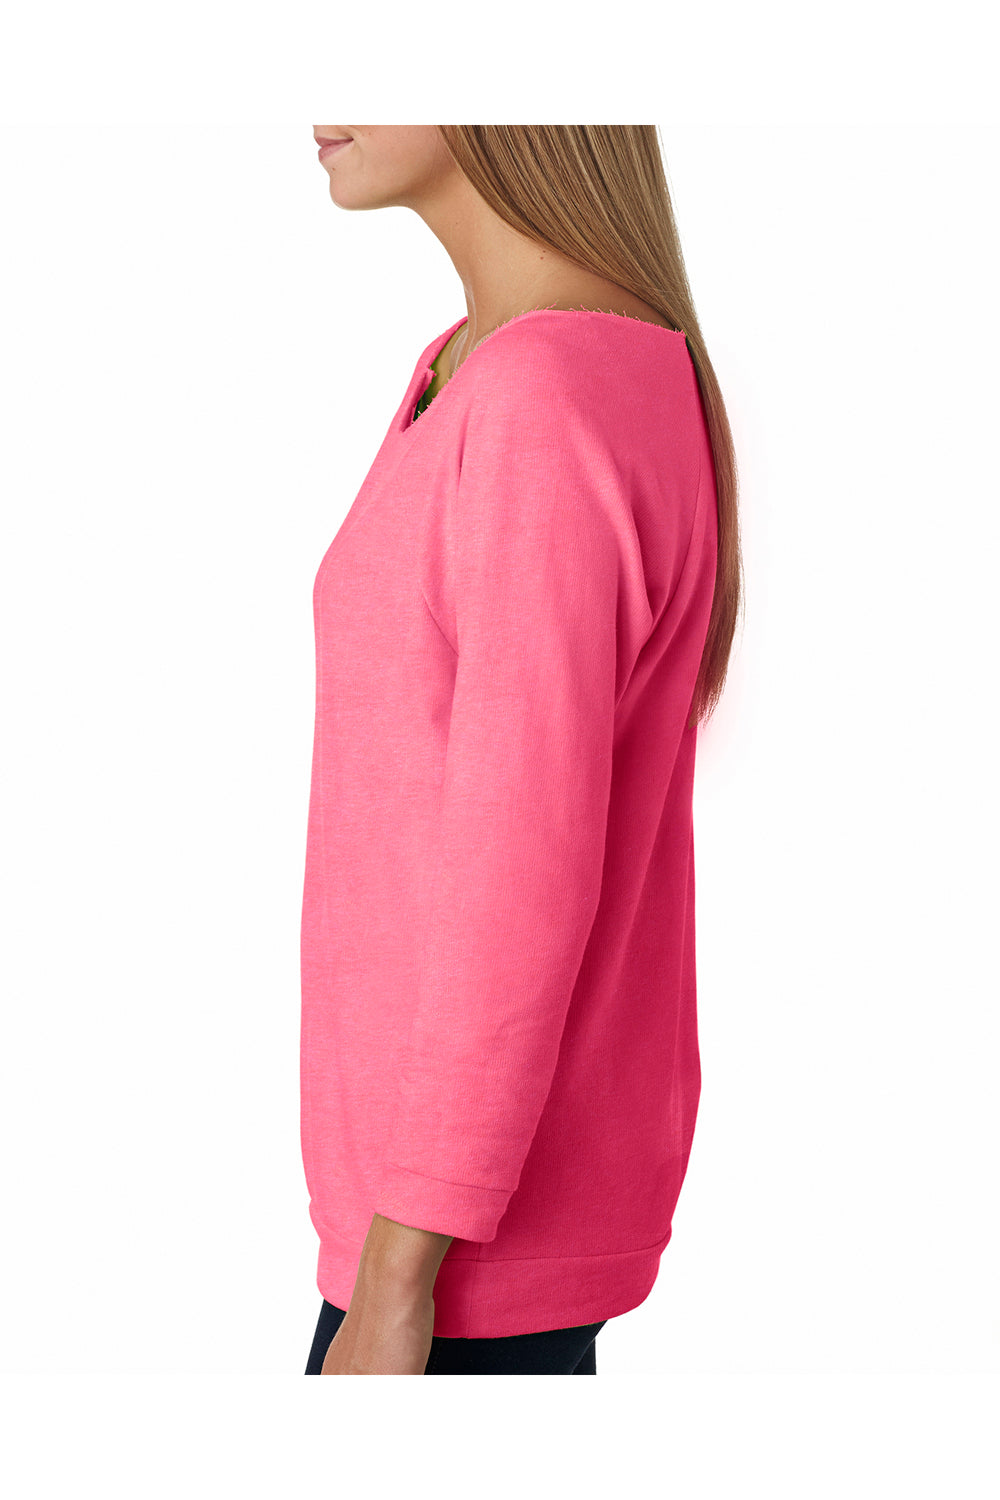 Next Level 6951 Womens French Terry 3/4 Sleeve Wide Neck T-Shirt Heather Neon Pink Side